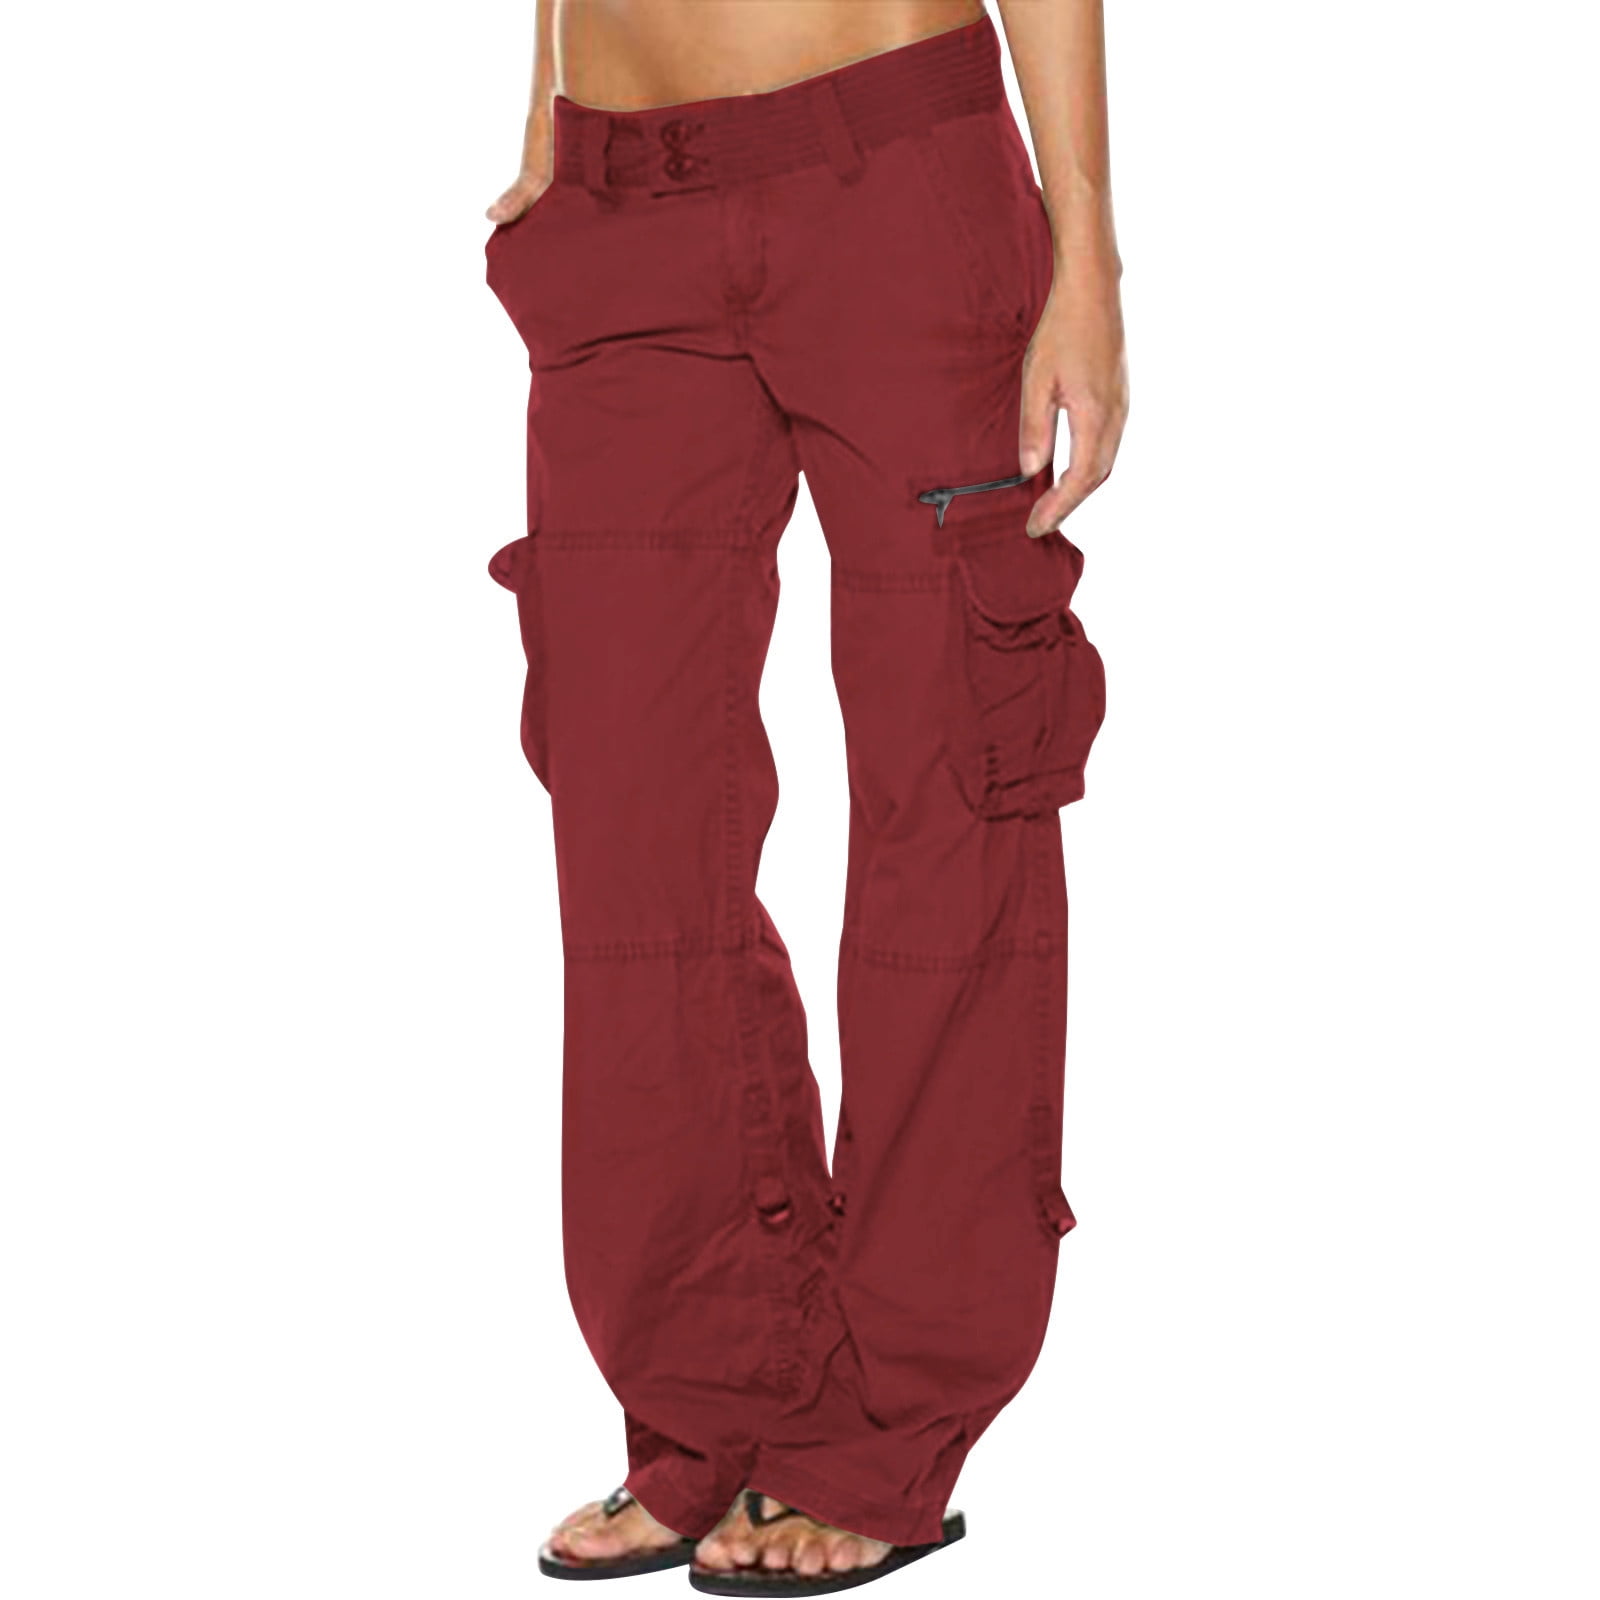 Women's Mid-Rise Casual Fit Cargo Pants - Knox Rose Light Brown XXL 